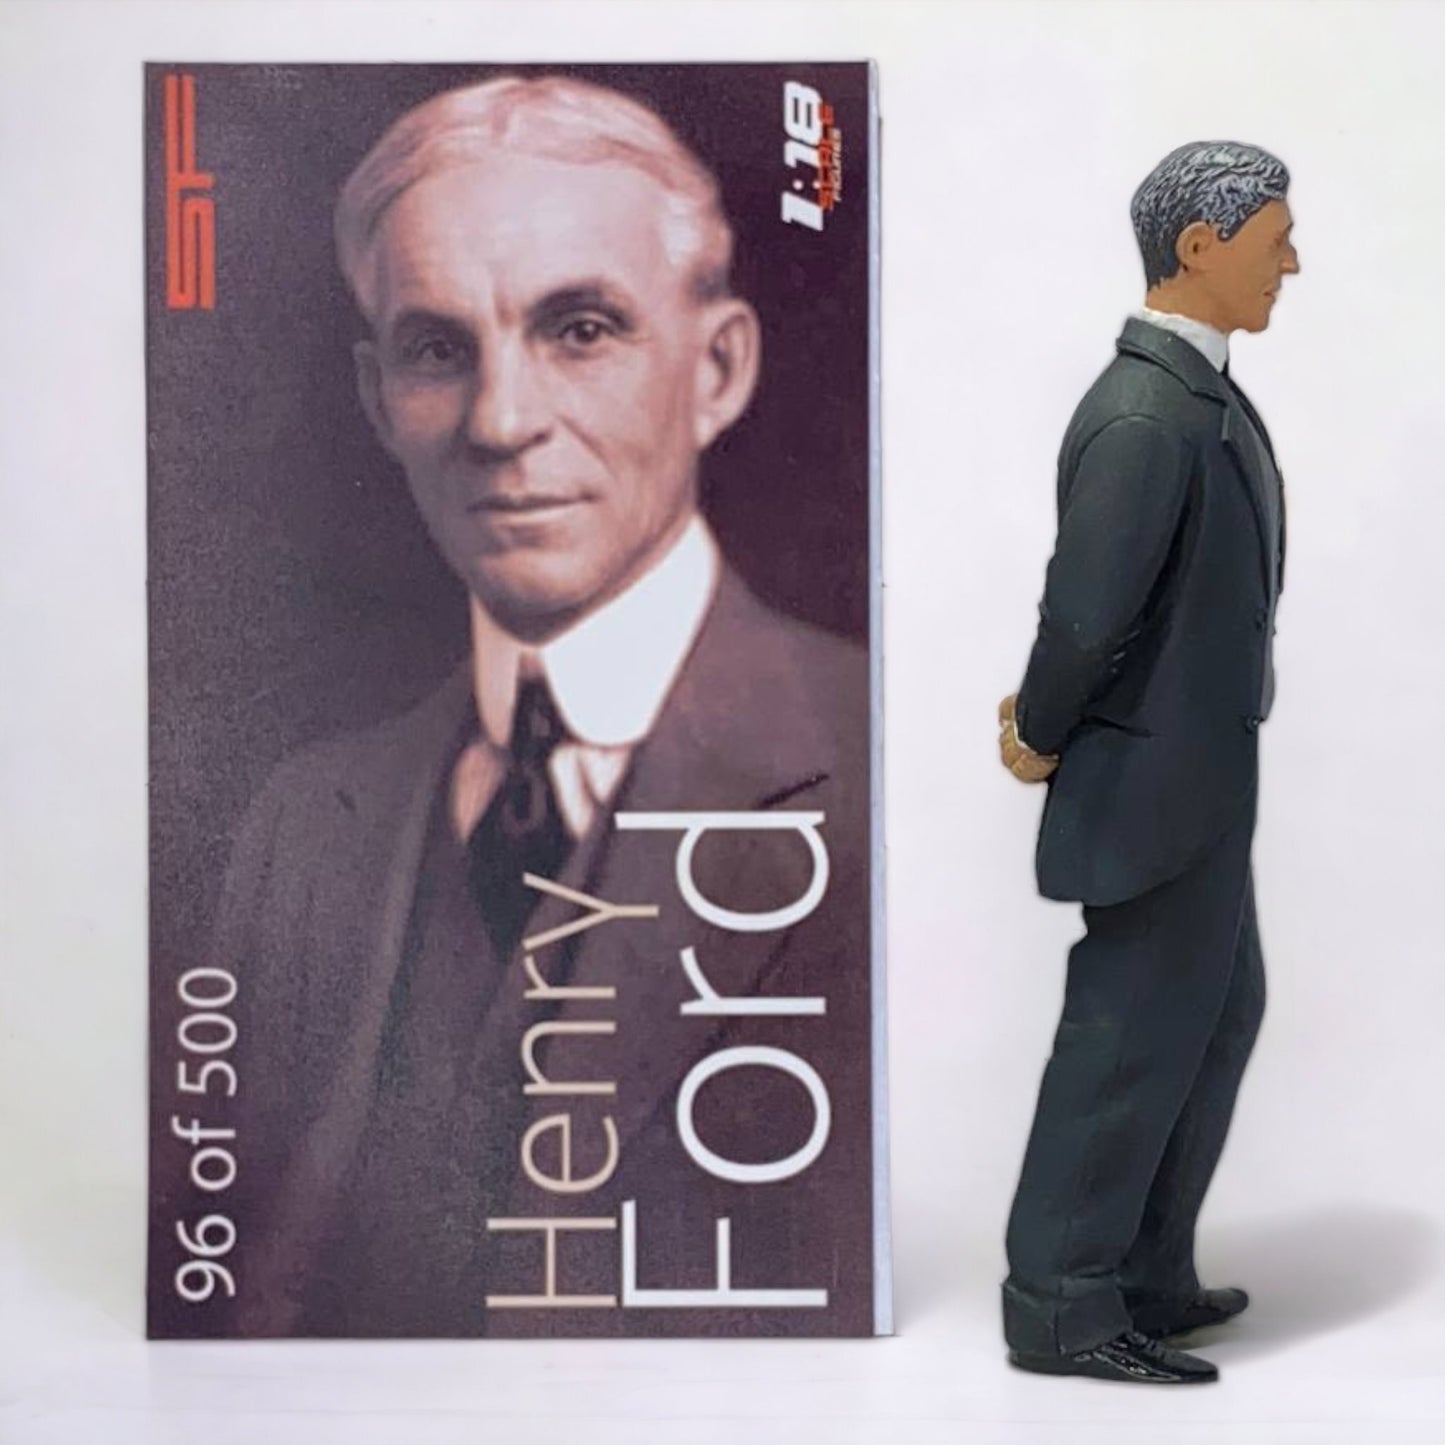 HENRY FORD FORD MOTOR Co. Figure - Action Figure by SF|Sold in Dturman.com Dubai UAE.